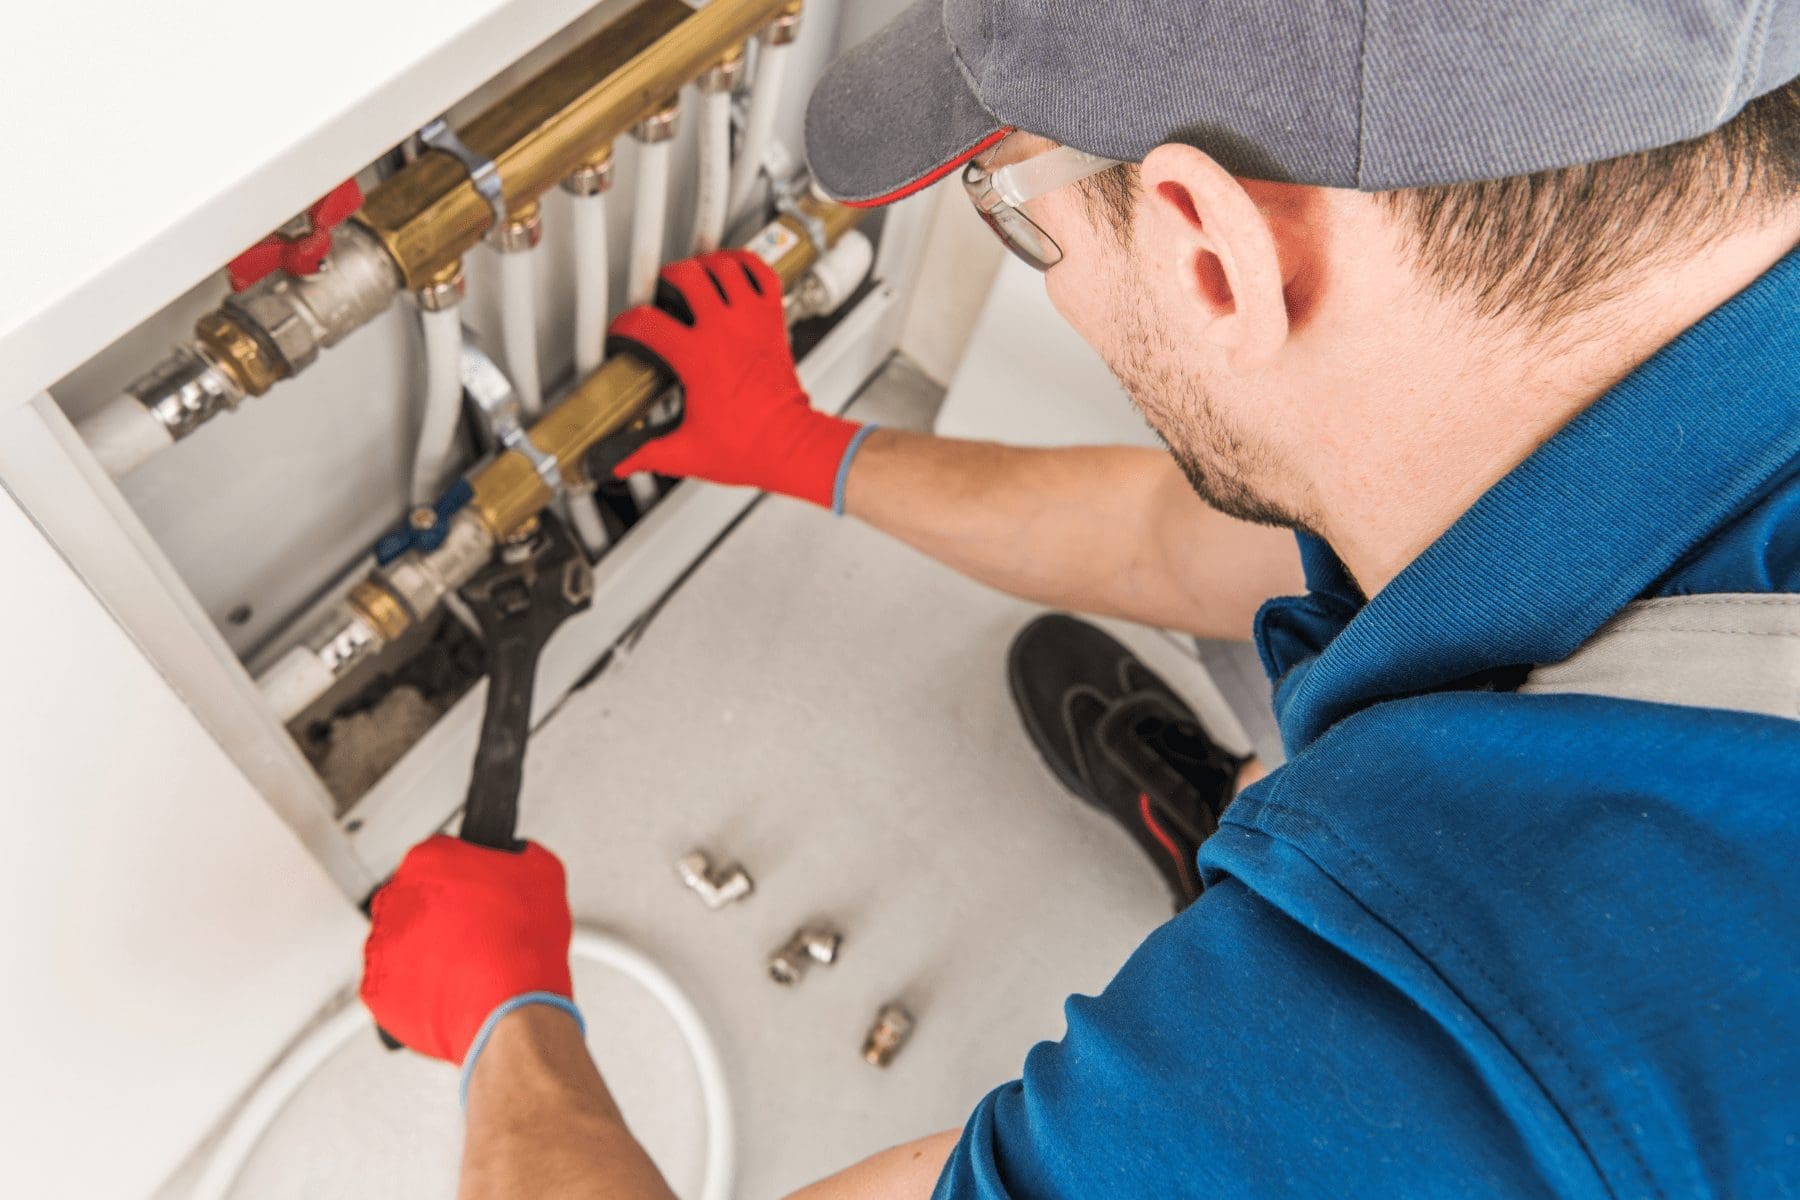 equipment breakdown insurance covering the cost of the hvac technician fixing cooling systme